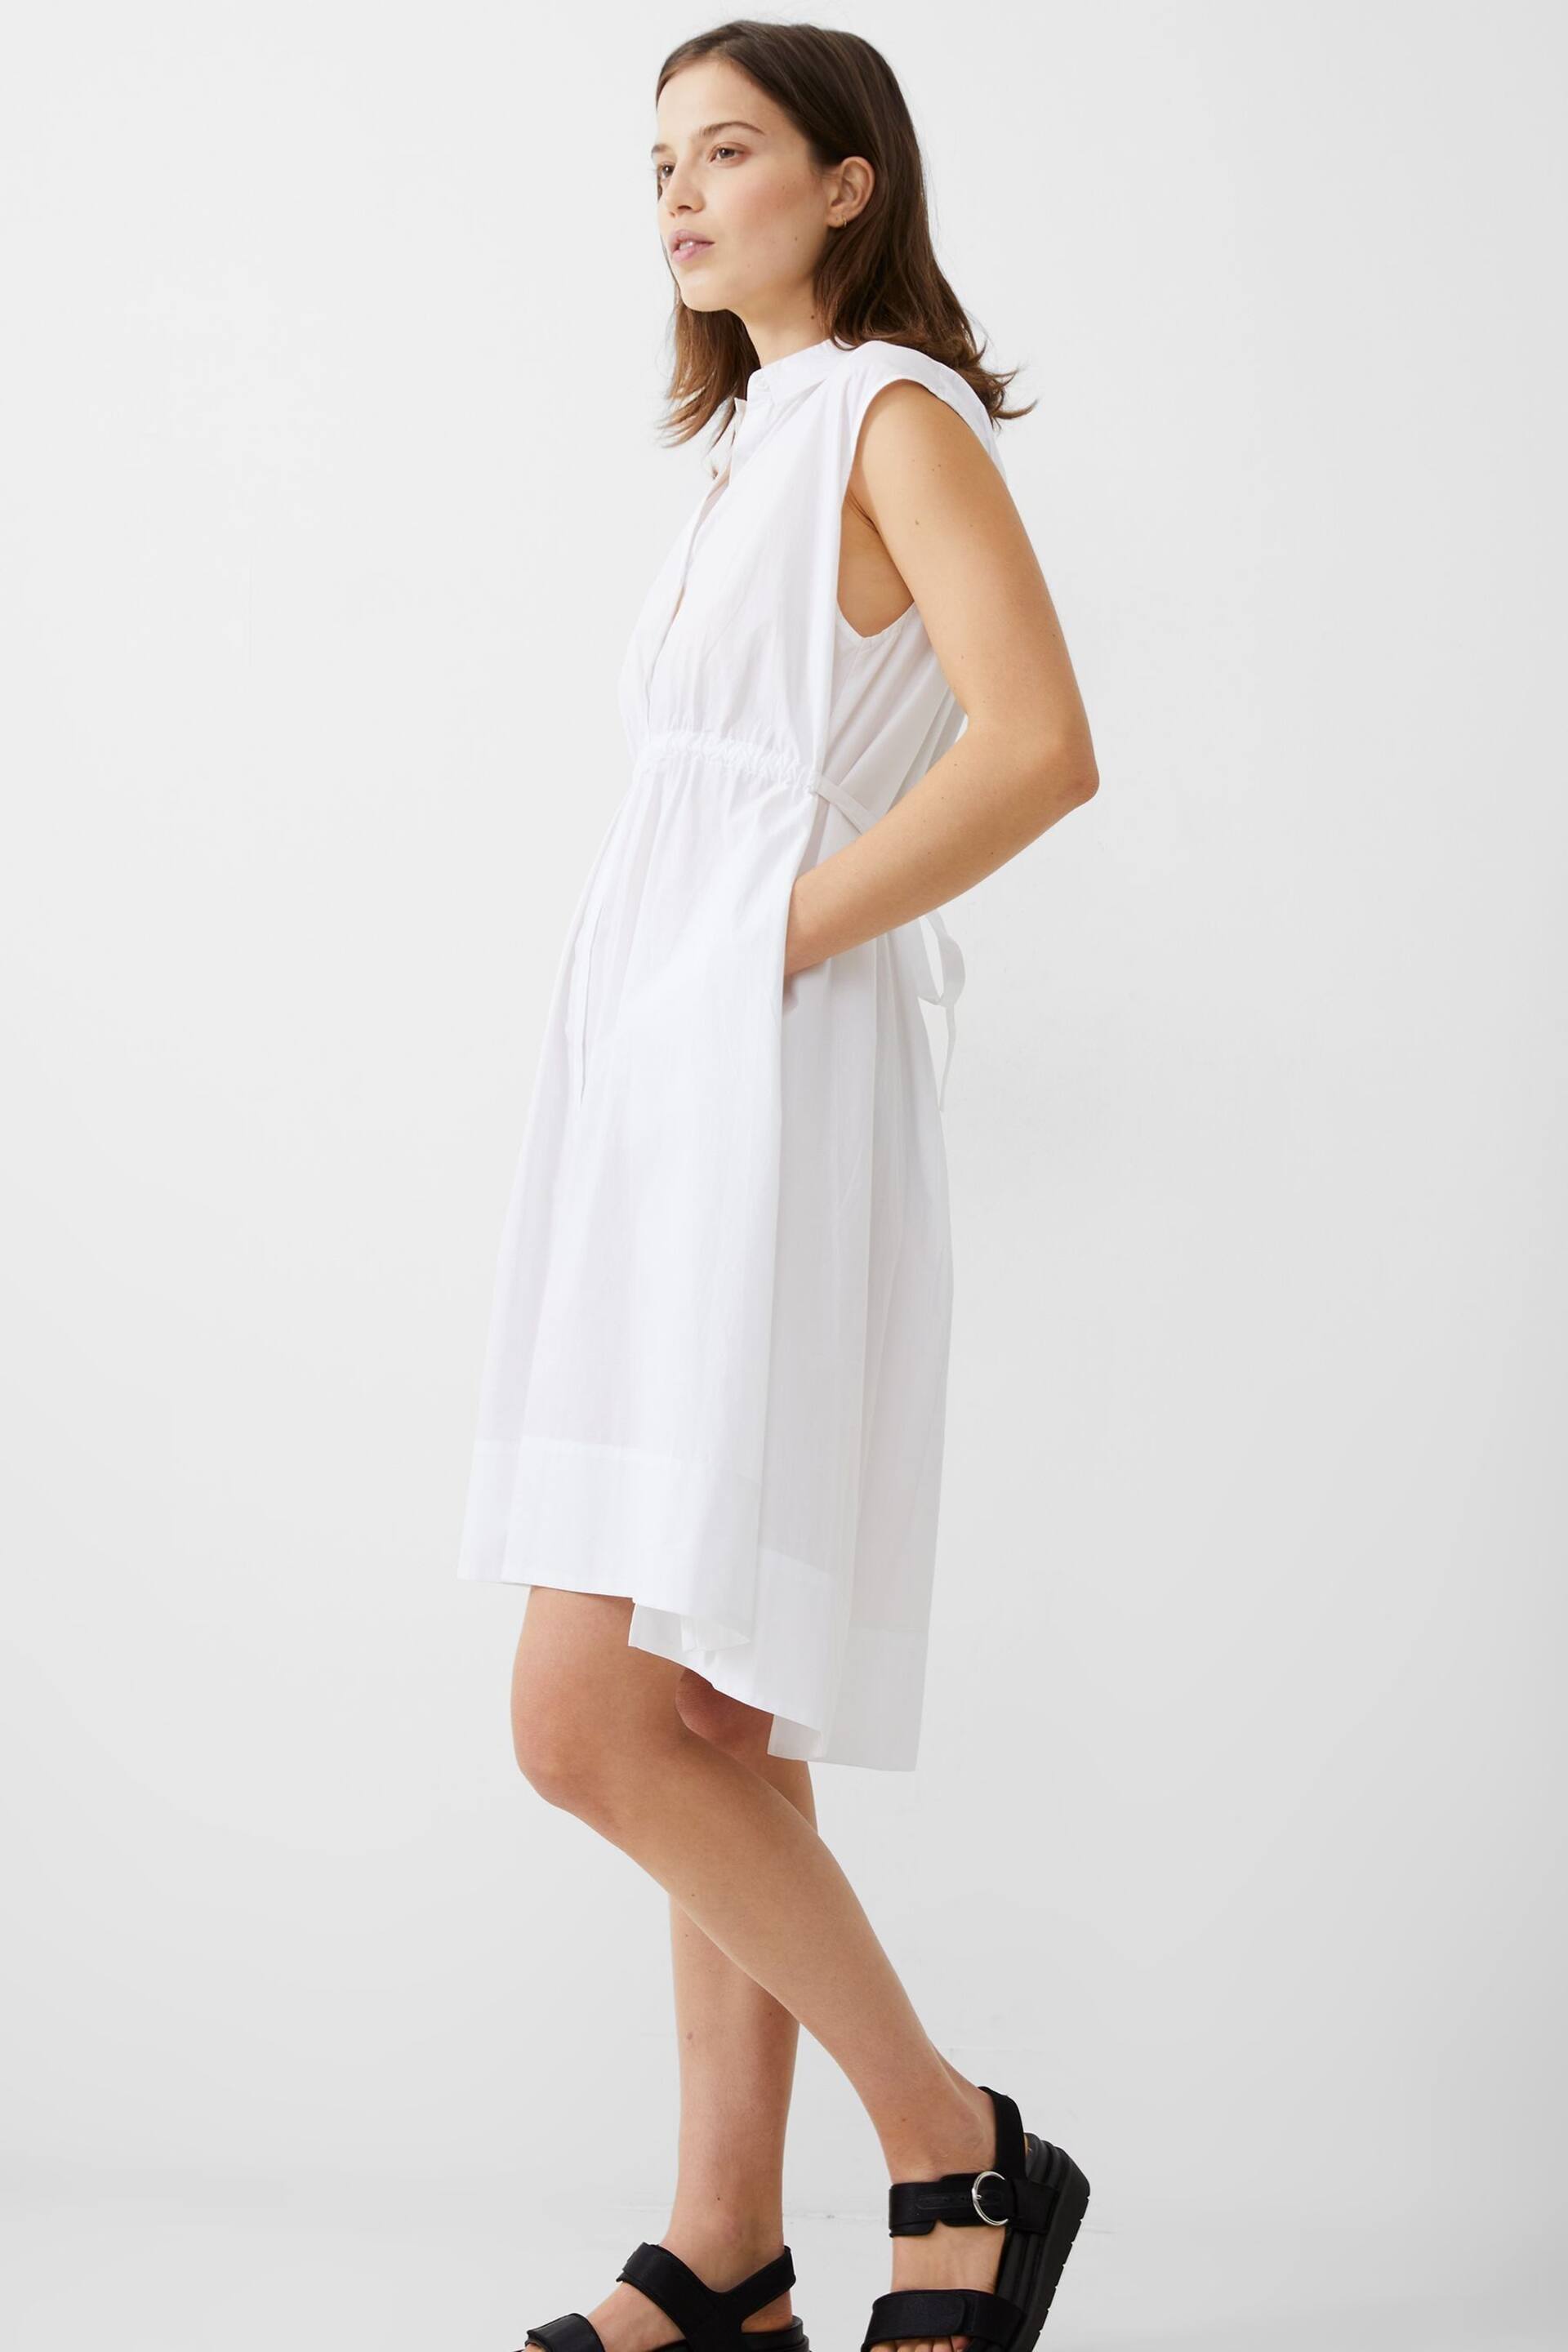 French Connection Rhodes Poplin Shirt Dress - Image 3 of 4